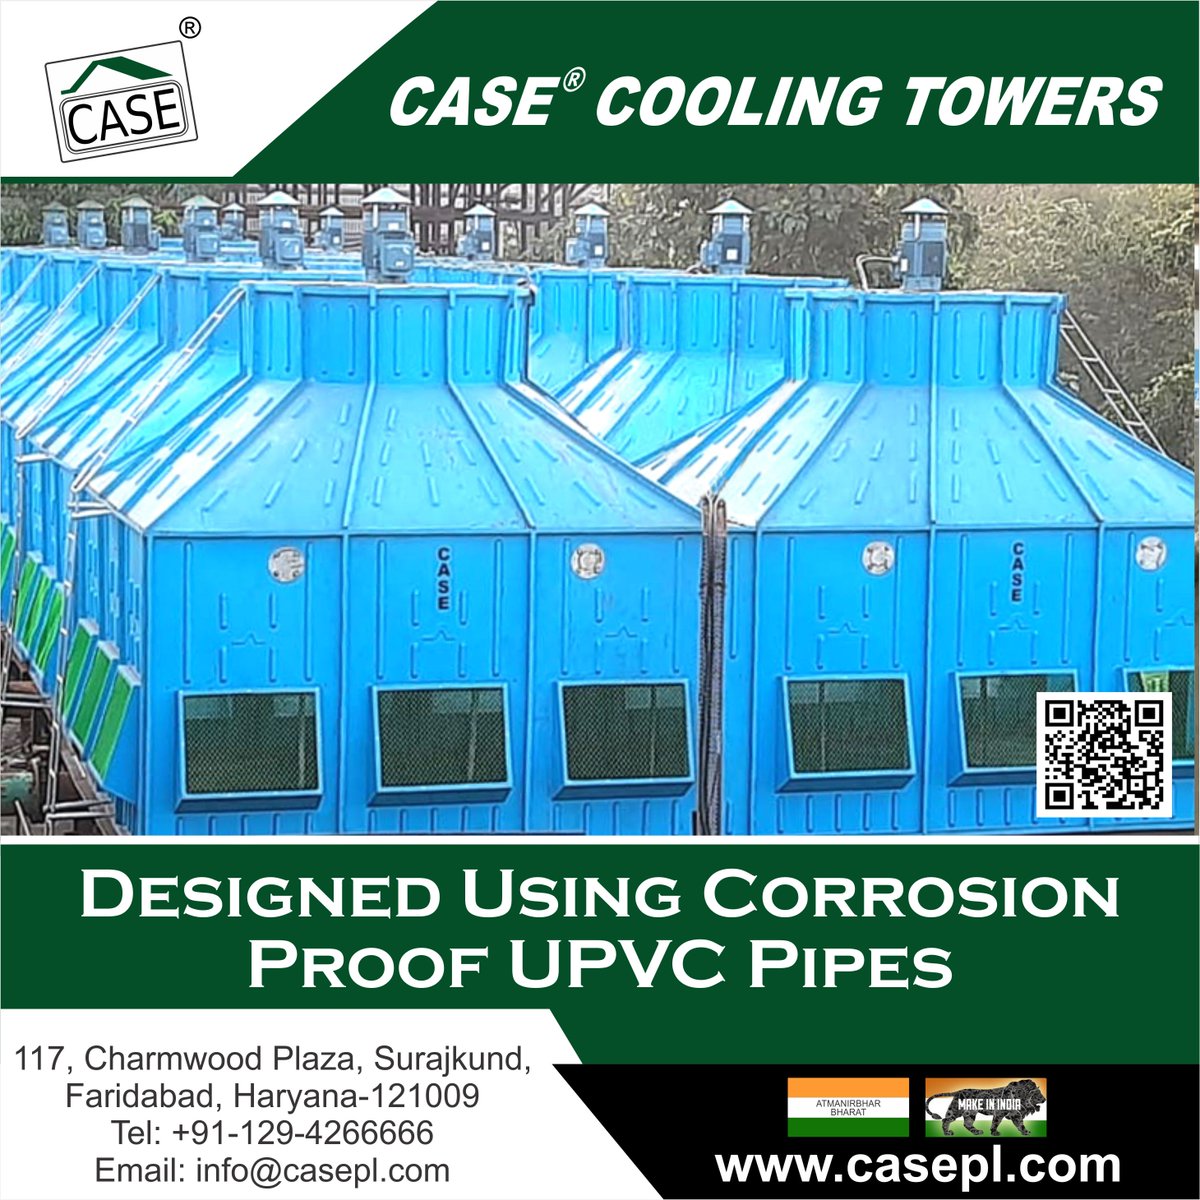 Water distribution system of the Cooling Tower is deliberately designed using UPVC distribution pipes. These pipes are totally corrosion proof and can be cleaned of dust or scale during maintenance schedule of the Cooling Tower.
#pvcpipes #coolingtower #coolingtowerwater